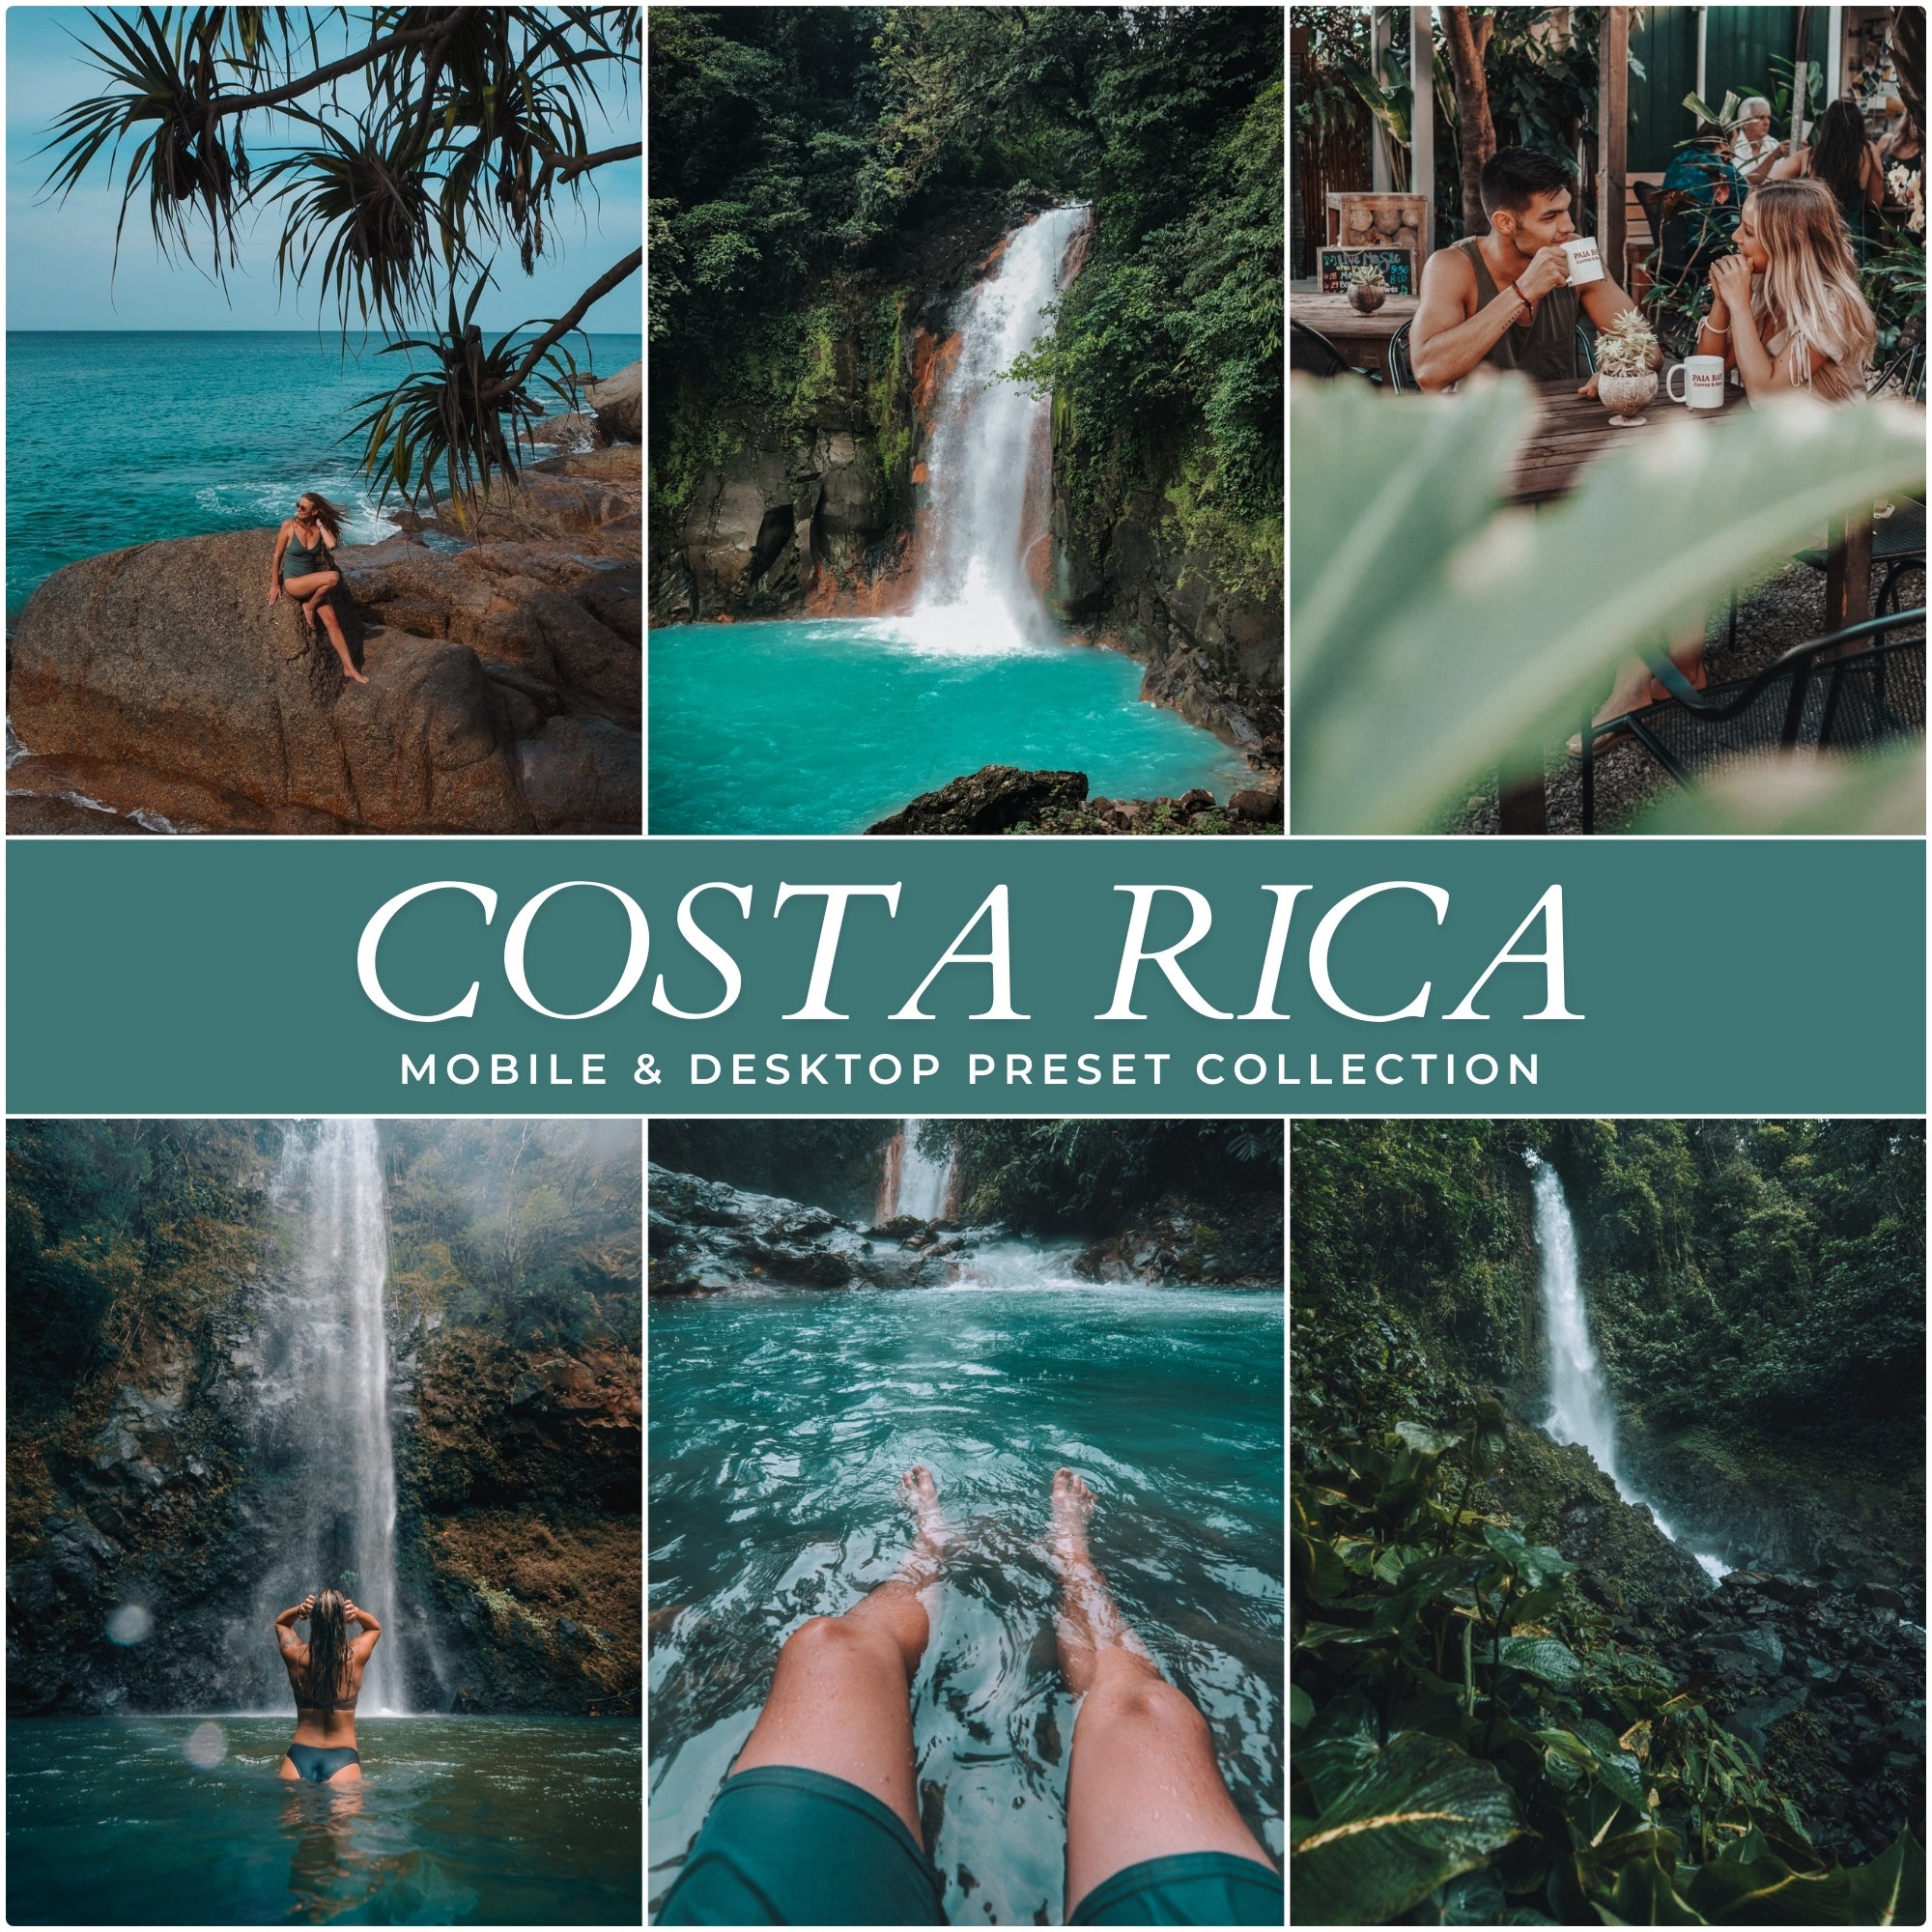 Costa Rica Travel Lightroom Presets For Photographers and Instagram Influencers Photo Editing In Adobe Lightroom By Lou And Marks Presets